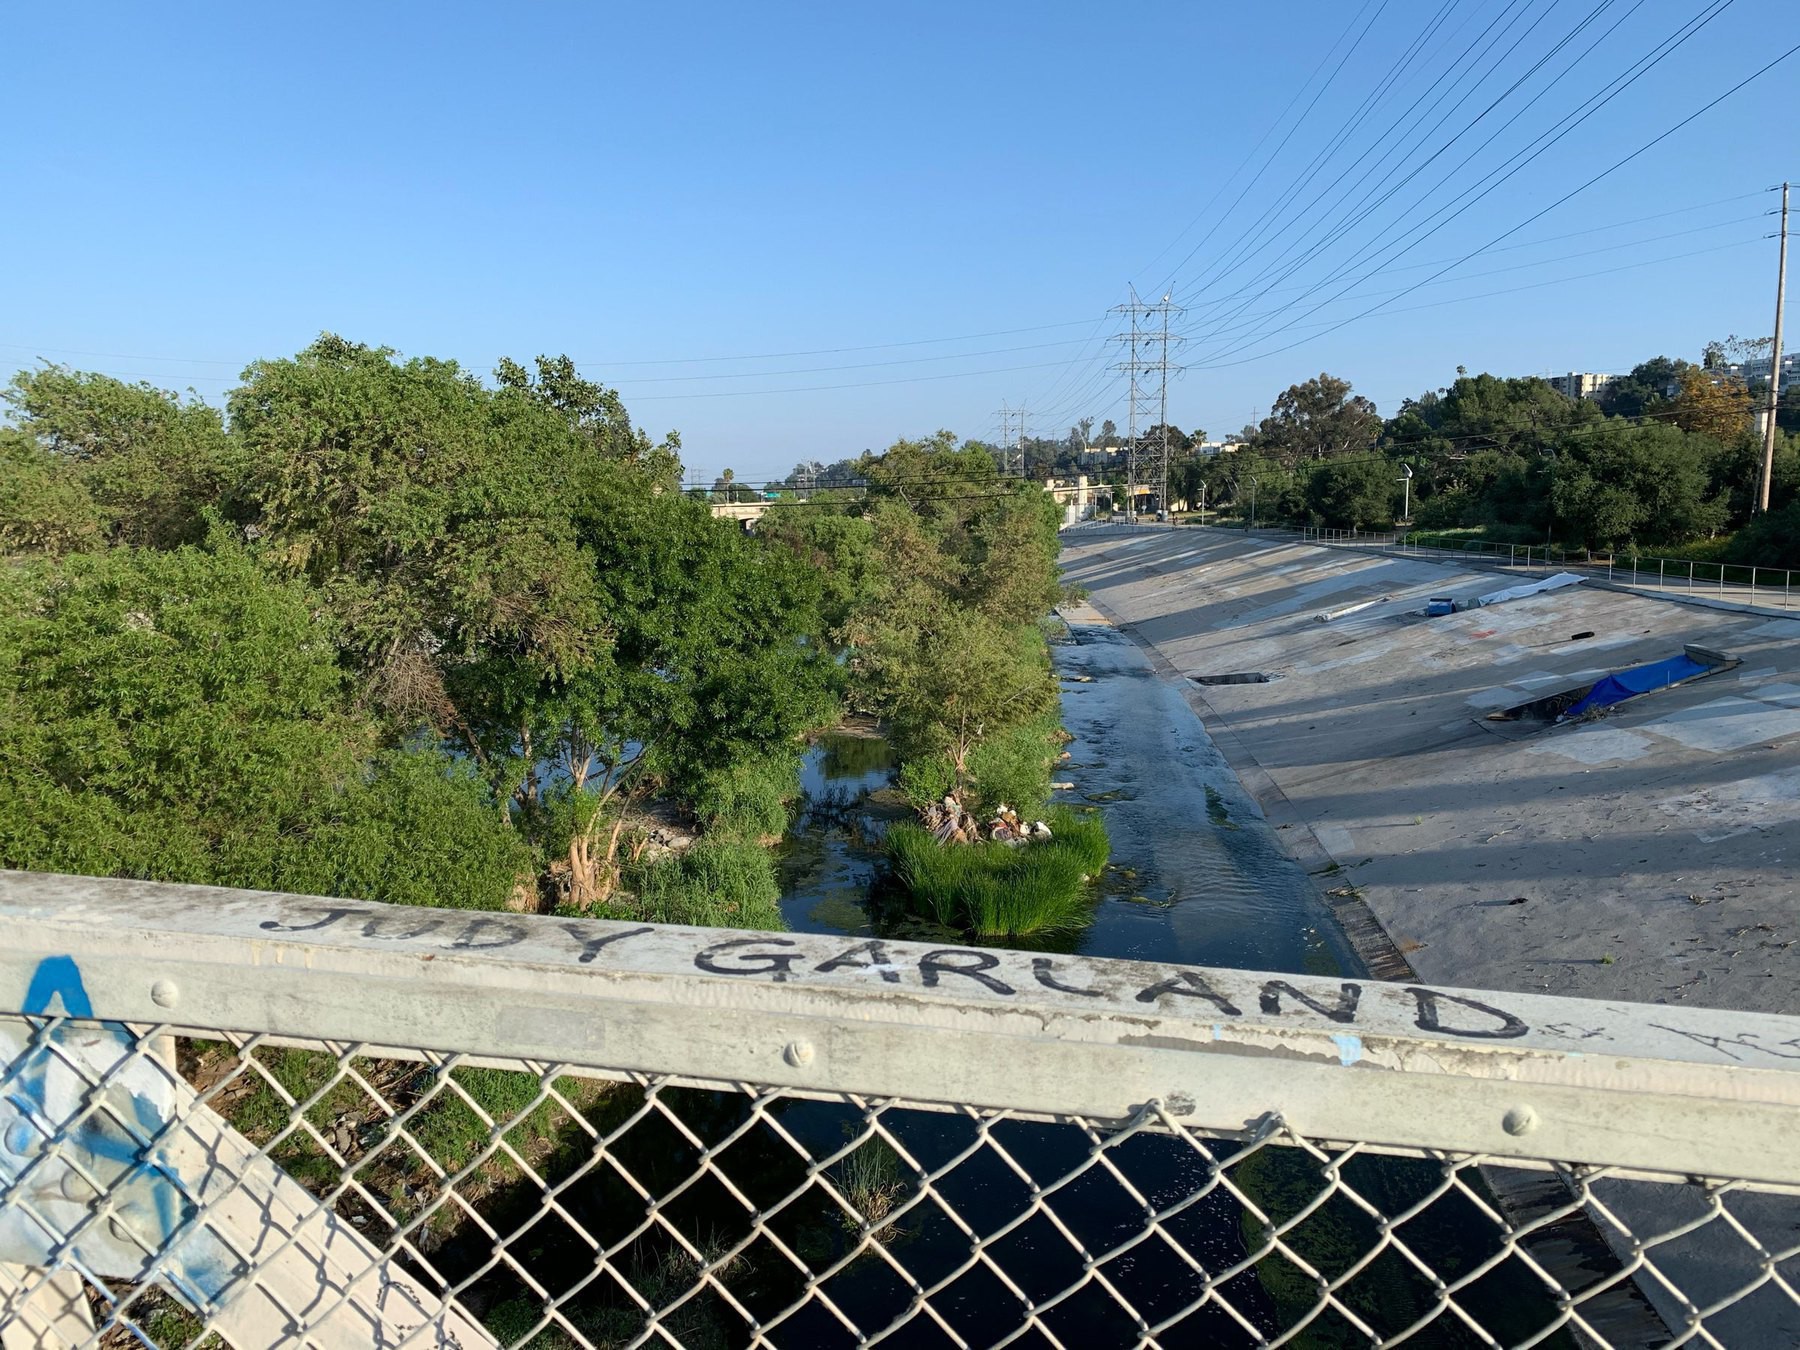 overlooking bridfe railing with Judy Garland written on it with wide blue sky and green trees in the LA river below